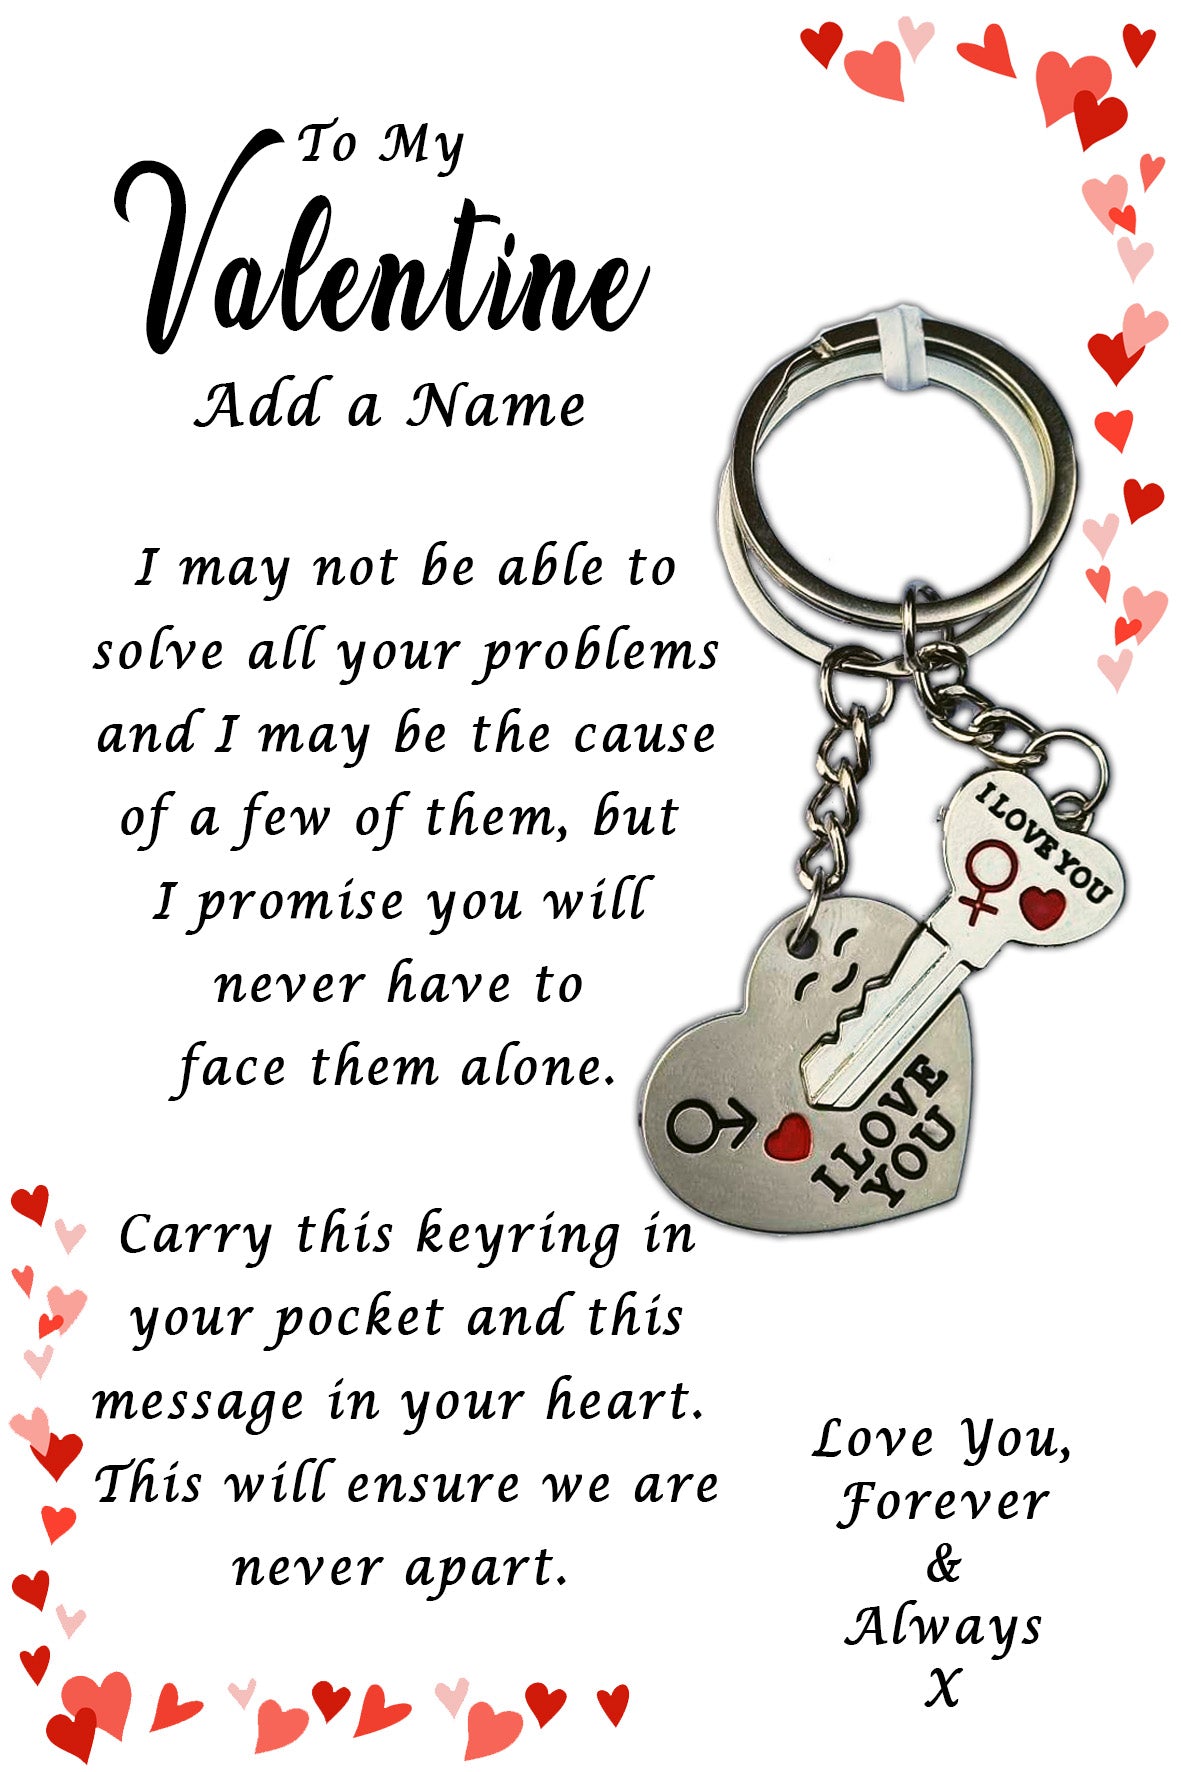 I Love You His & Hers Keyrings and Personalised Valentine Card